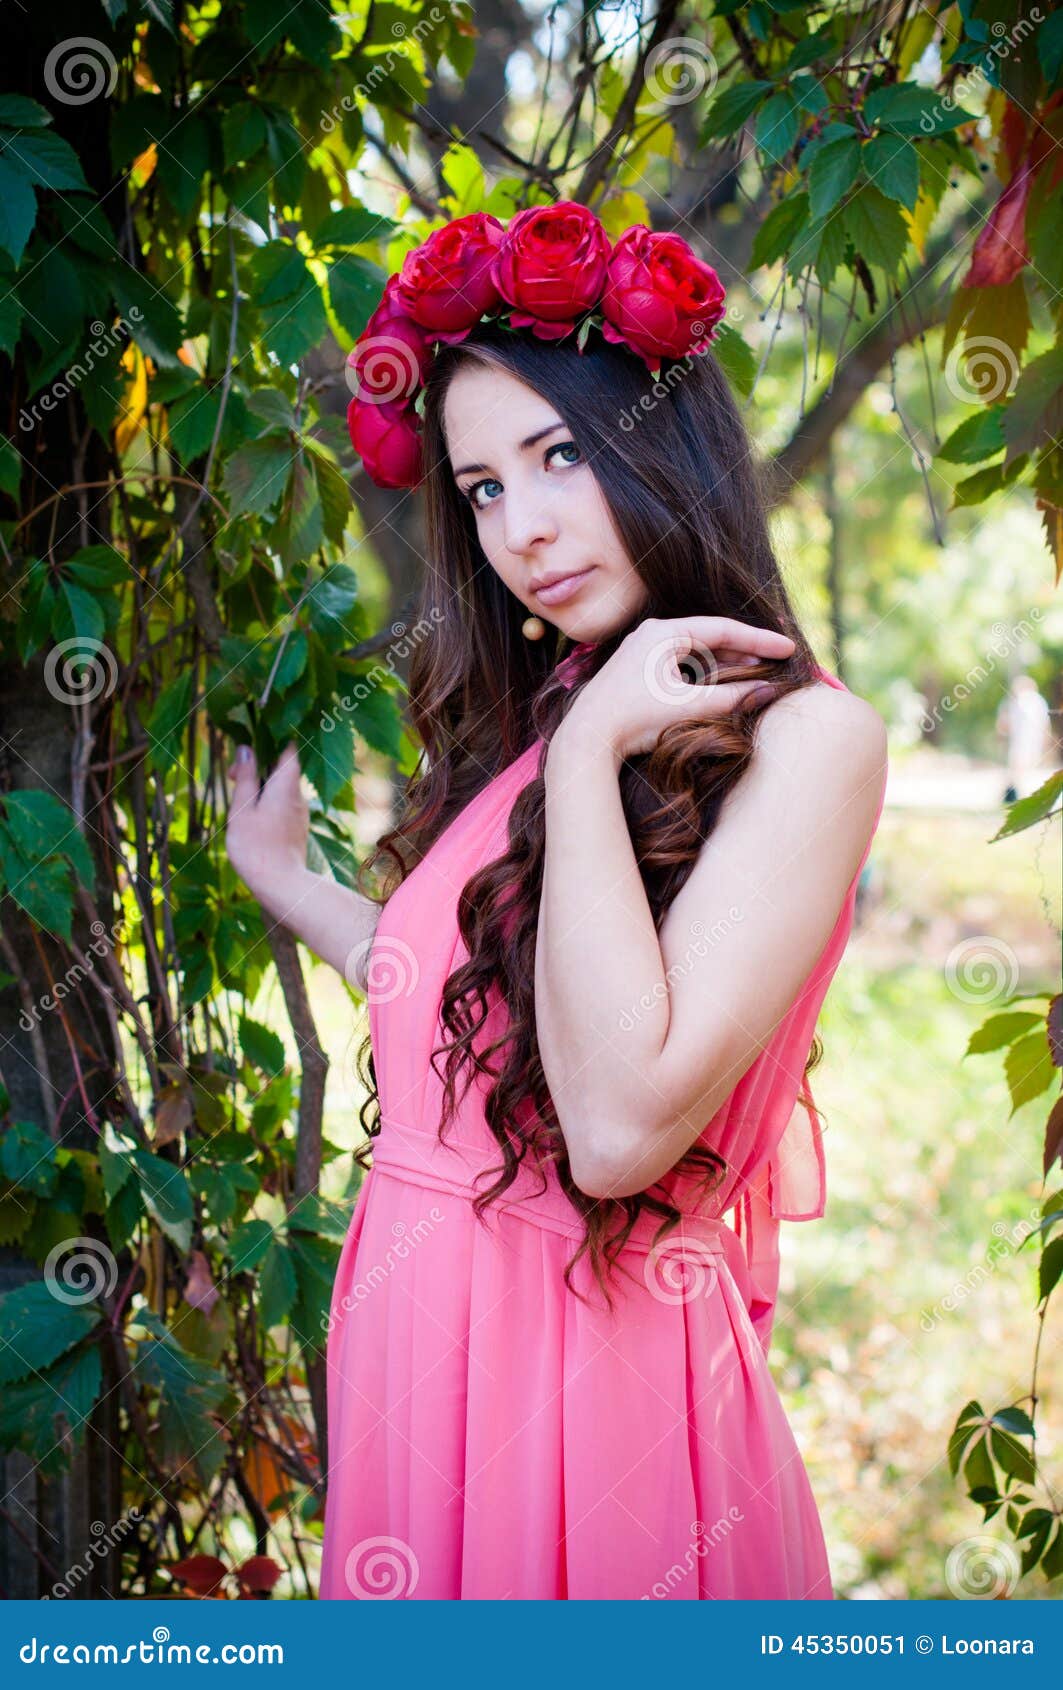 Girl Wearing a Crown of Roses Stock Image - Image of green, curly: 45350051